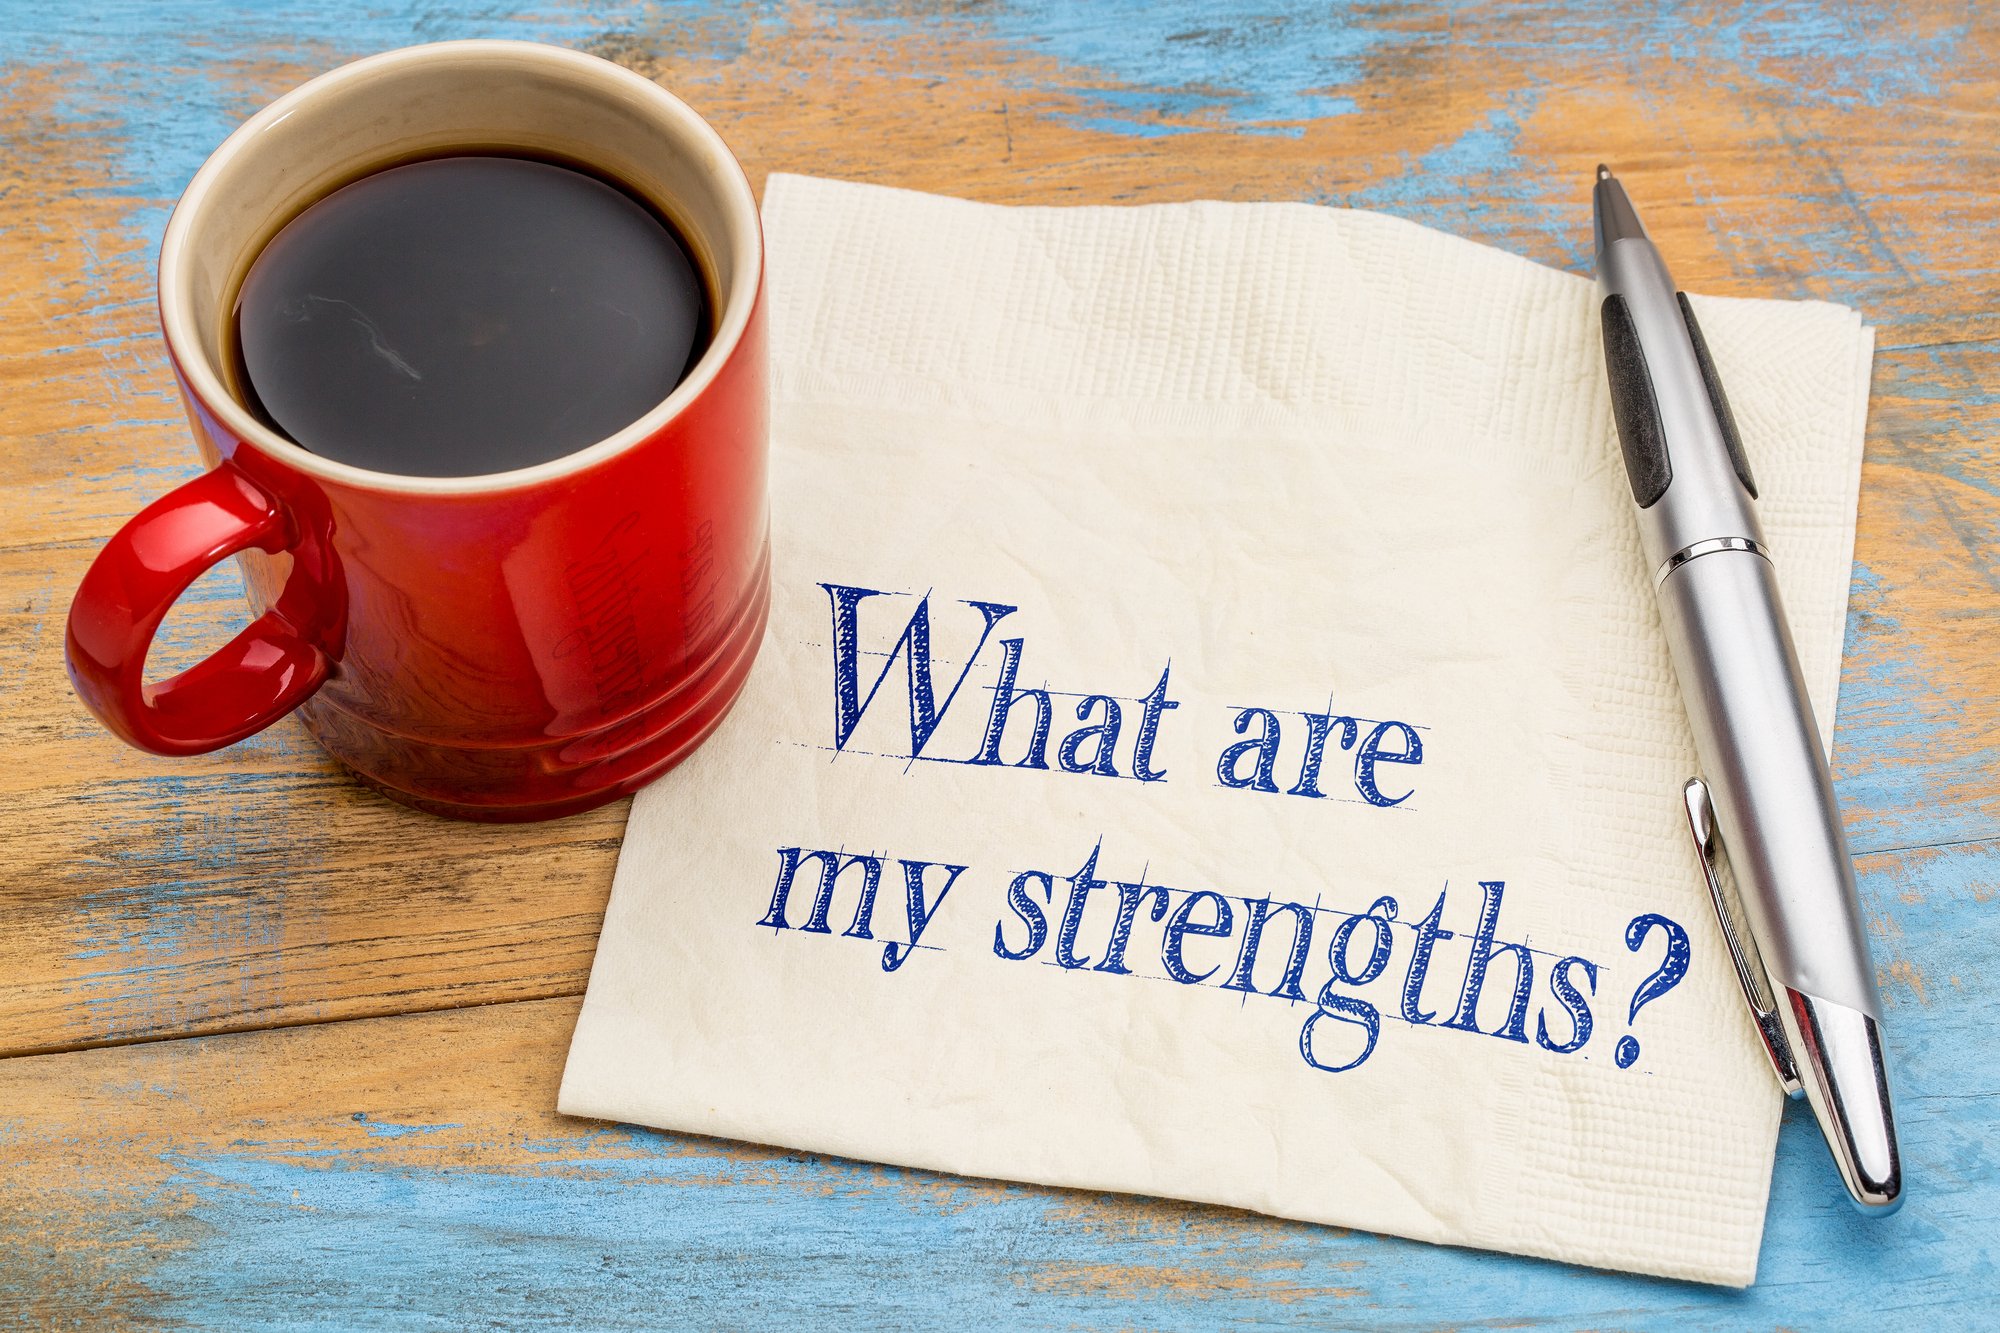 Strengths-based Positive Psychology Coaching